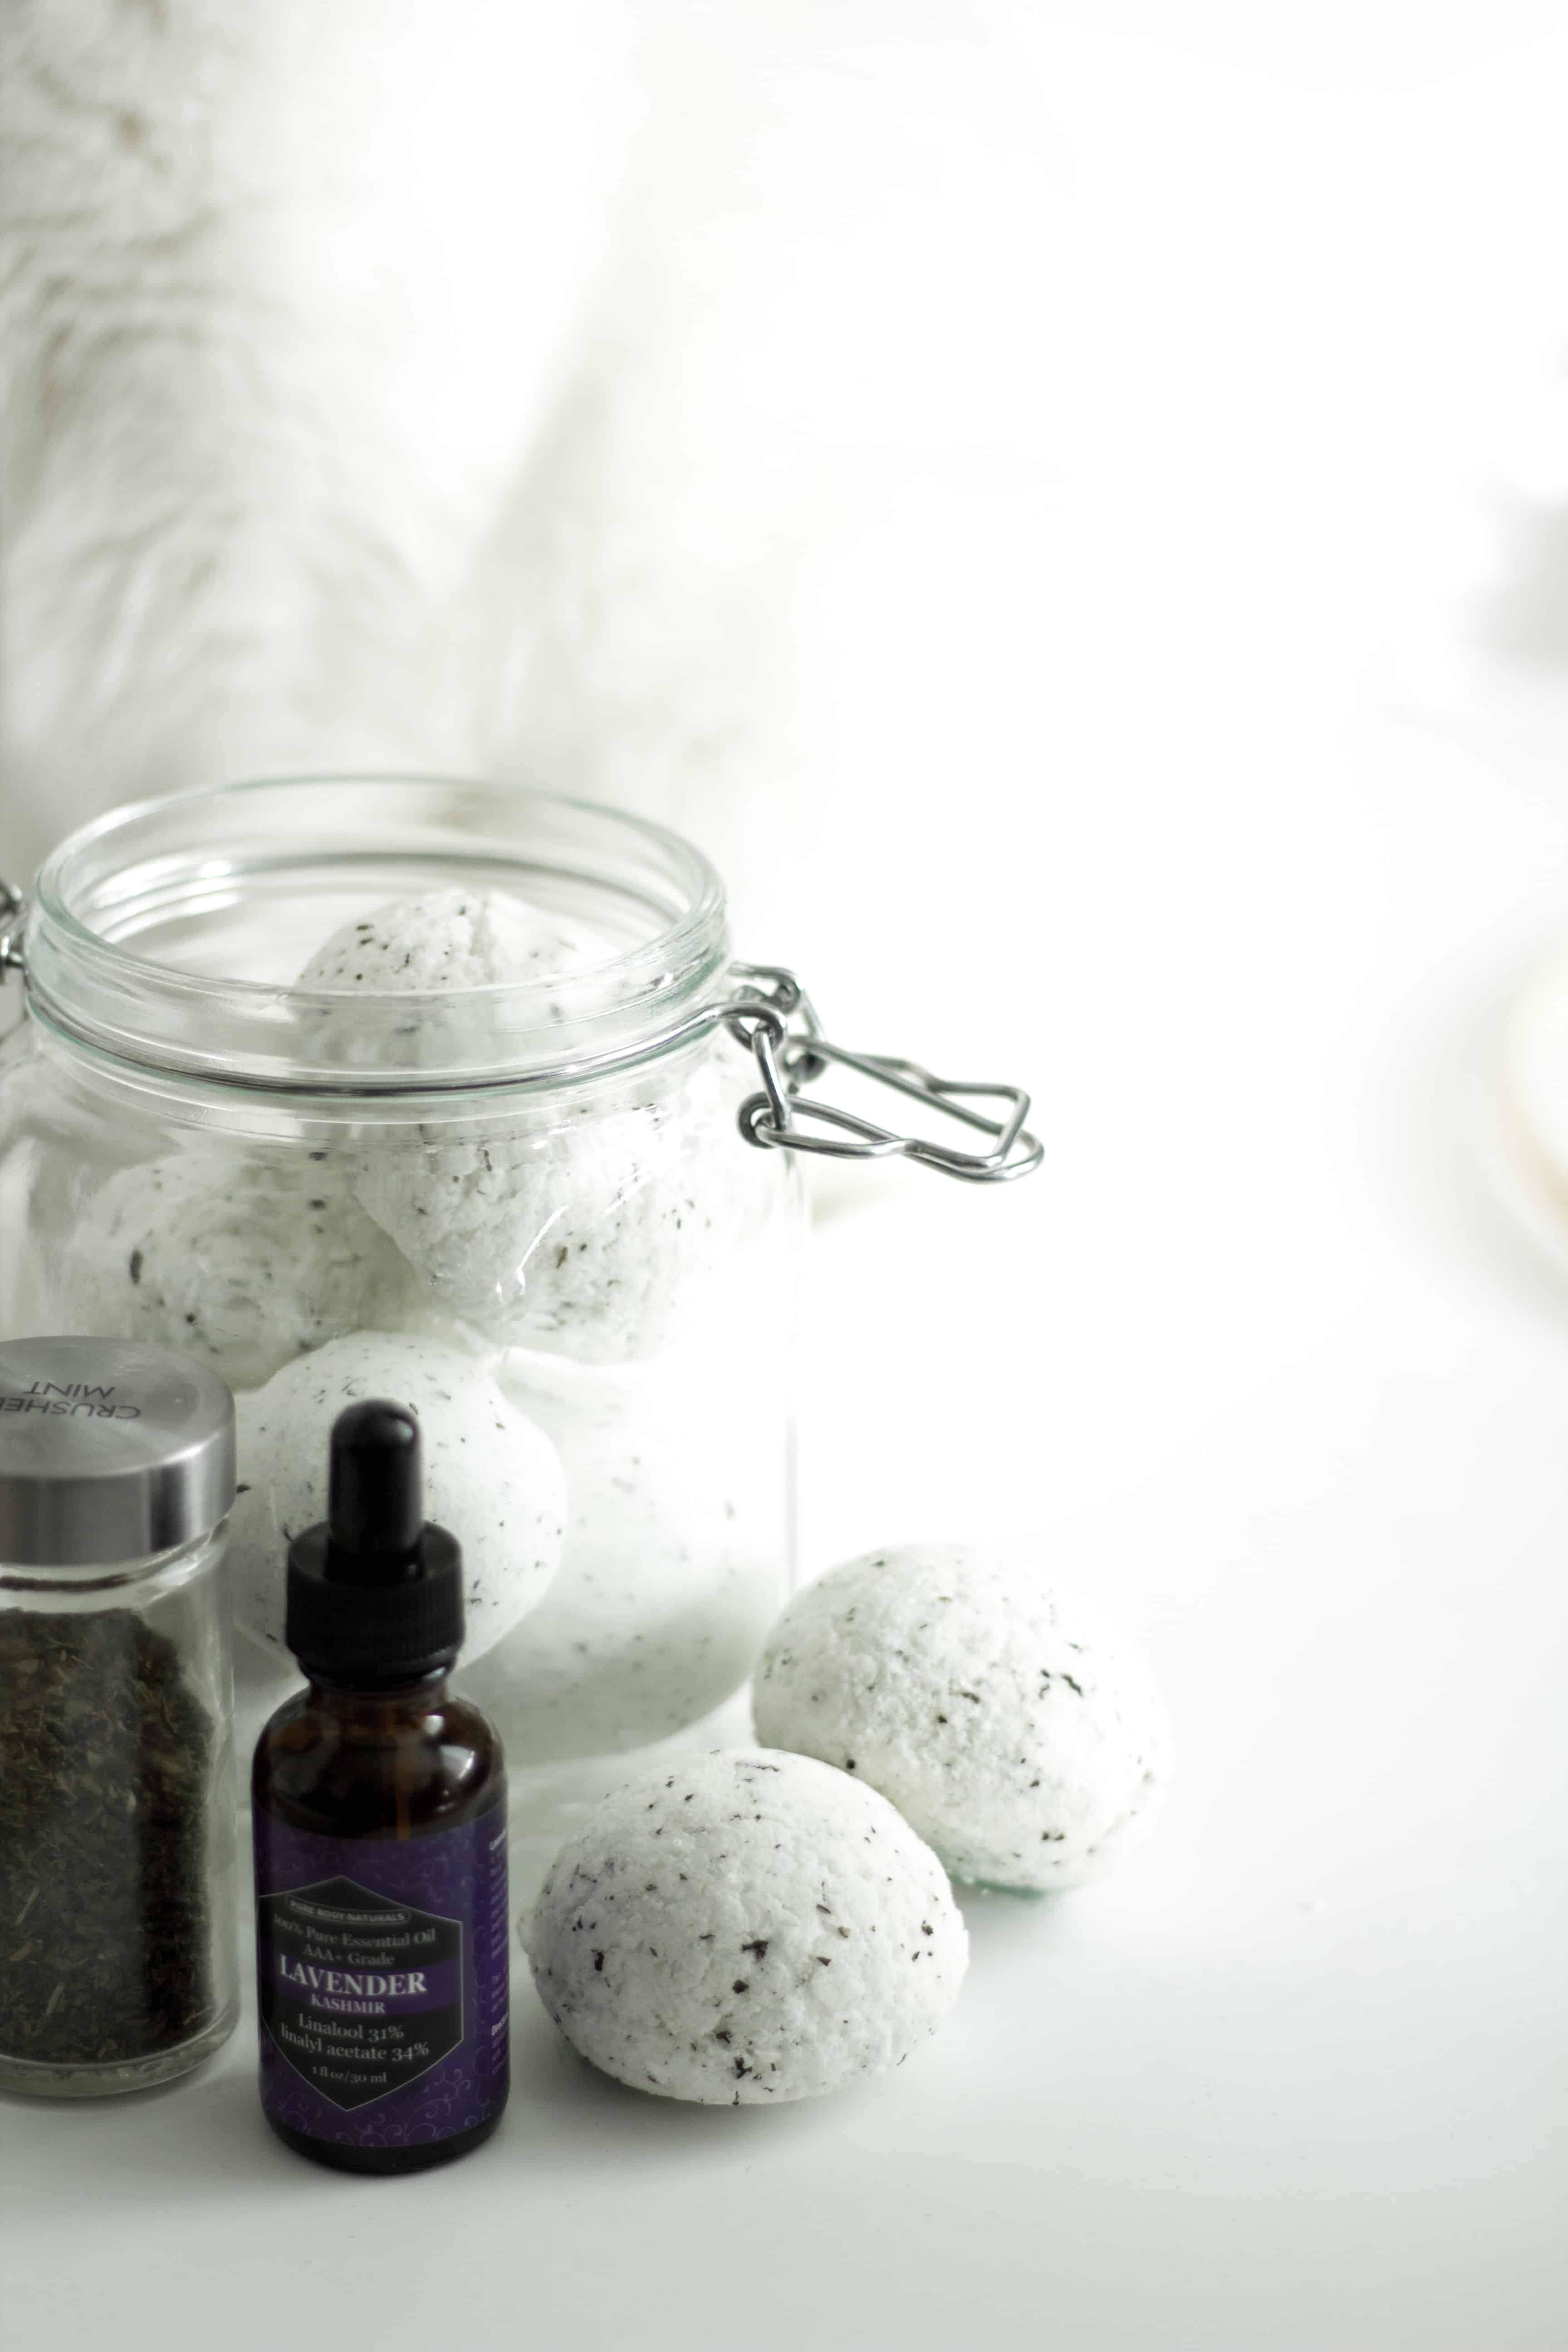 Step by step on how to create these delicious smelling bath bombs without them breaking, sagging or just falling apart!